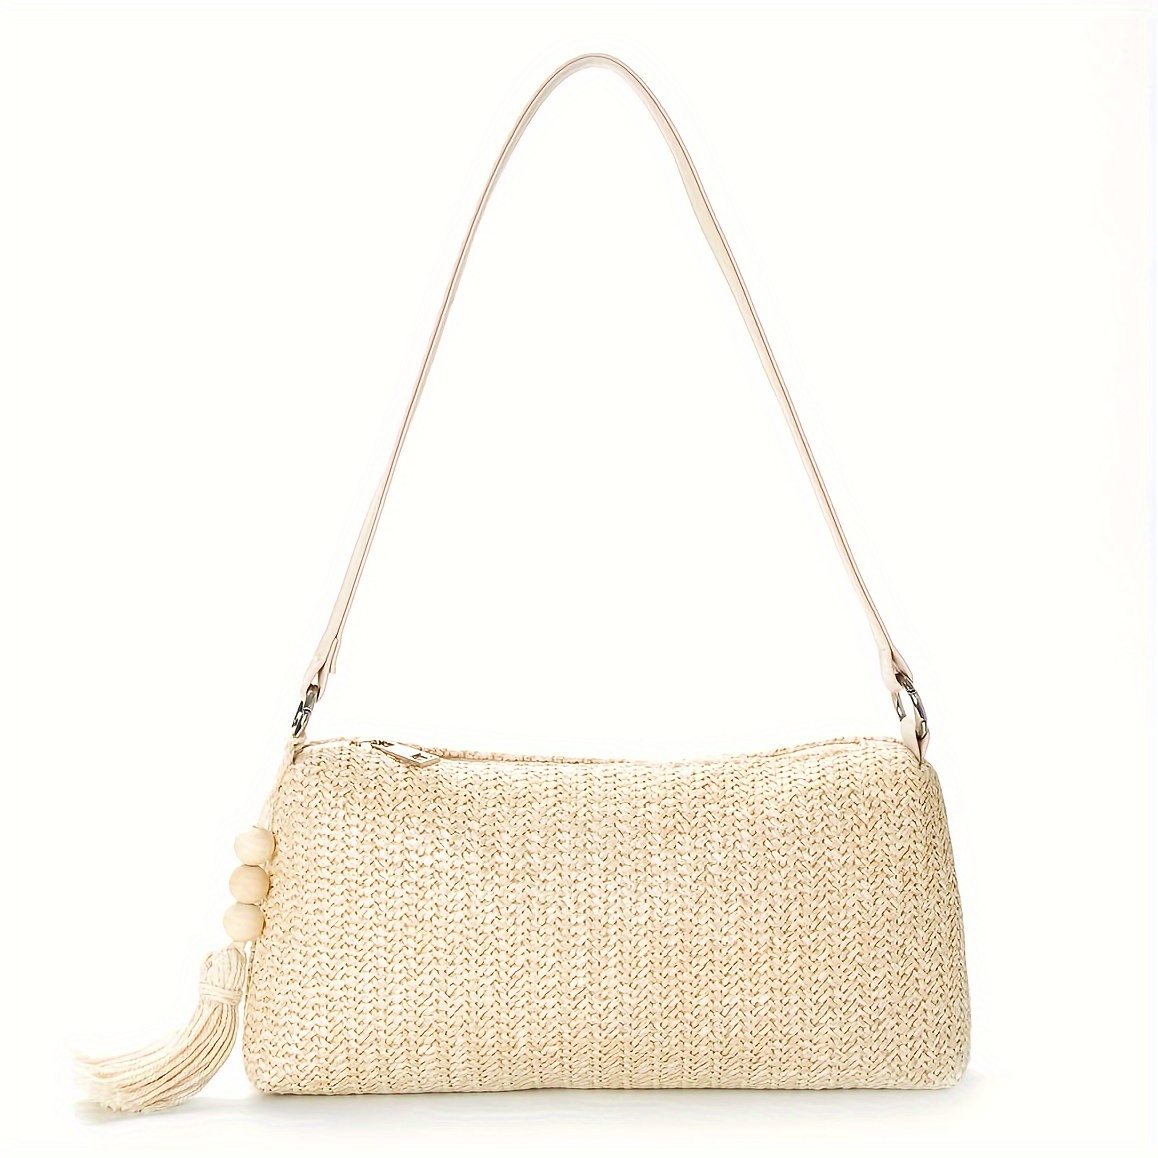 

Women's Simple Straw Shoulder Bag Summer Commuter Bag, Woven Casual Handbag Fashionable And Versatile Item Suitable For Going Out And Daily Use